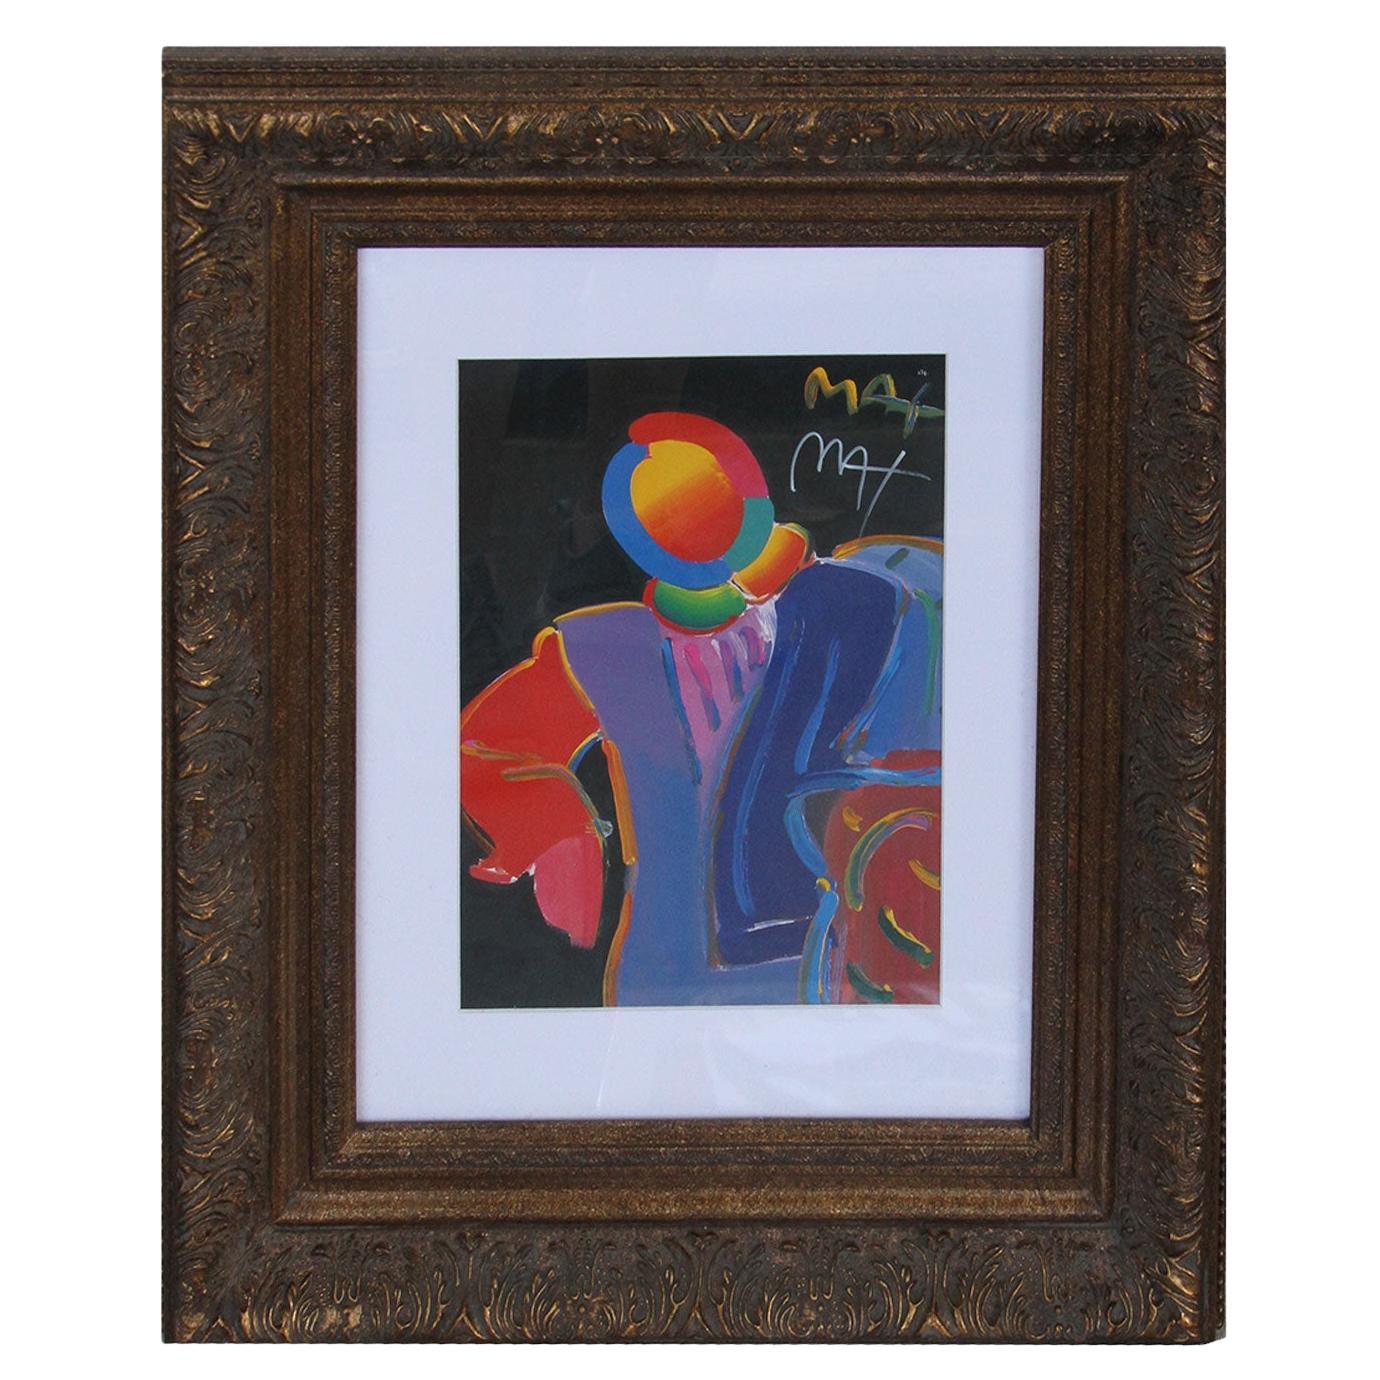 Limited Edition Print by Peter Max "Dega Man" For Sale